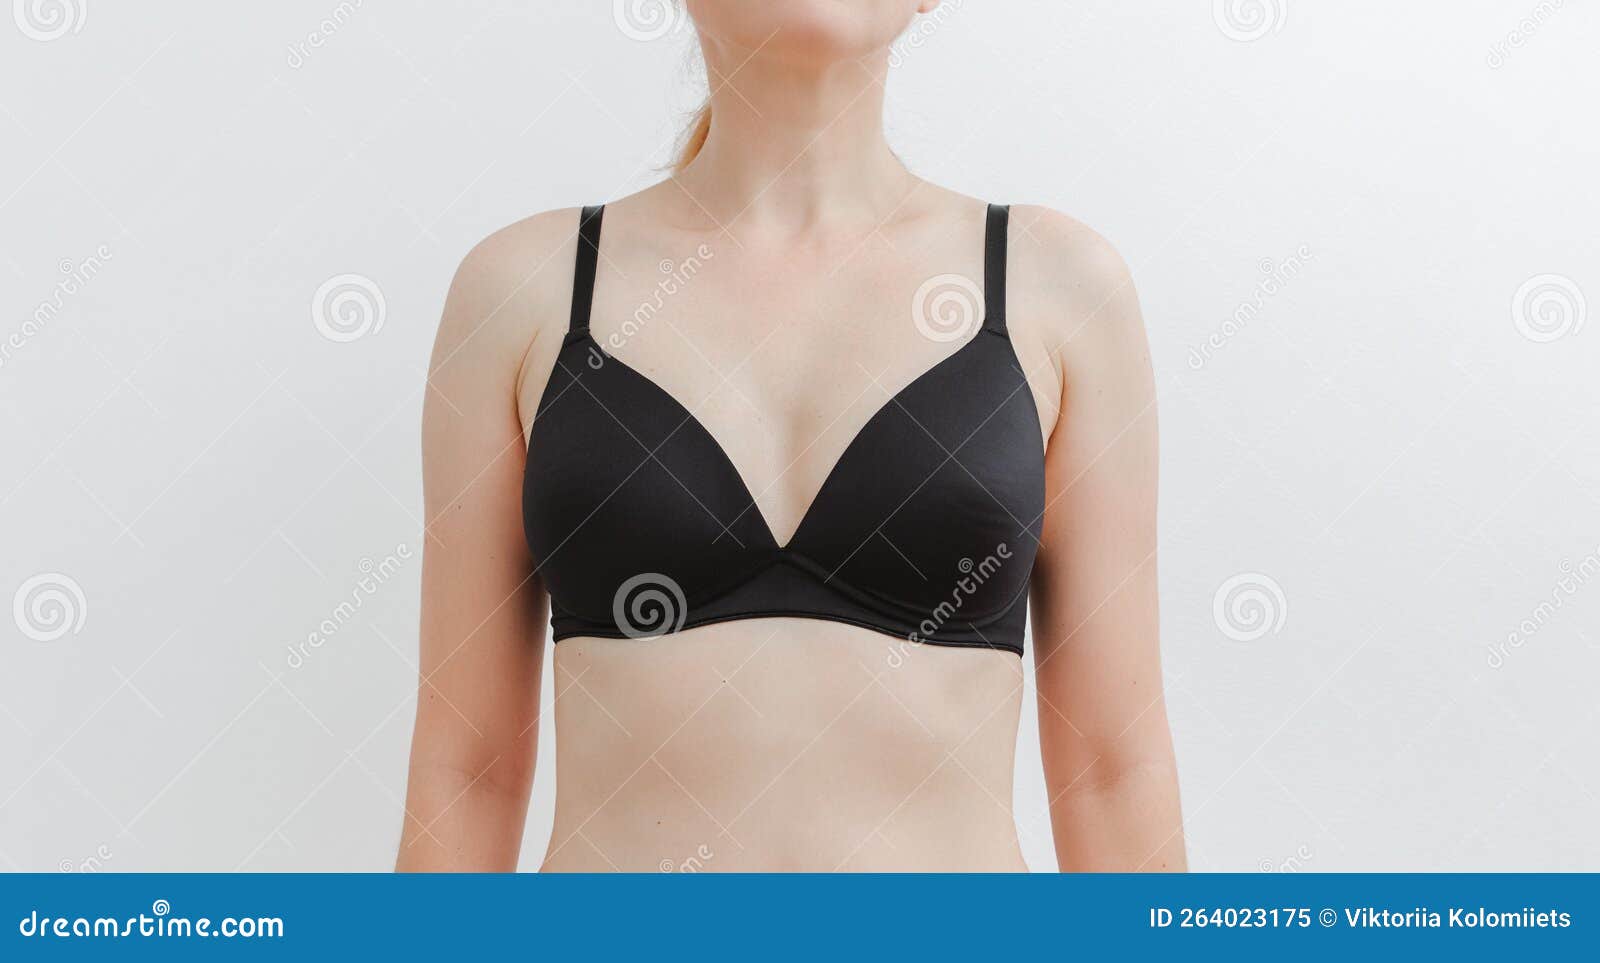 A Young Pretty Woman in a Black Bra. Stunning Girl in Underwear